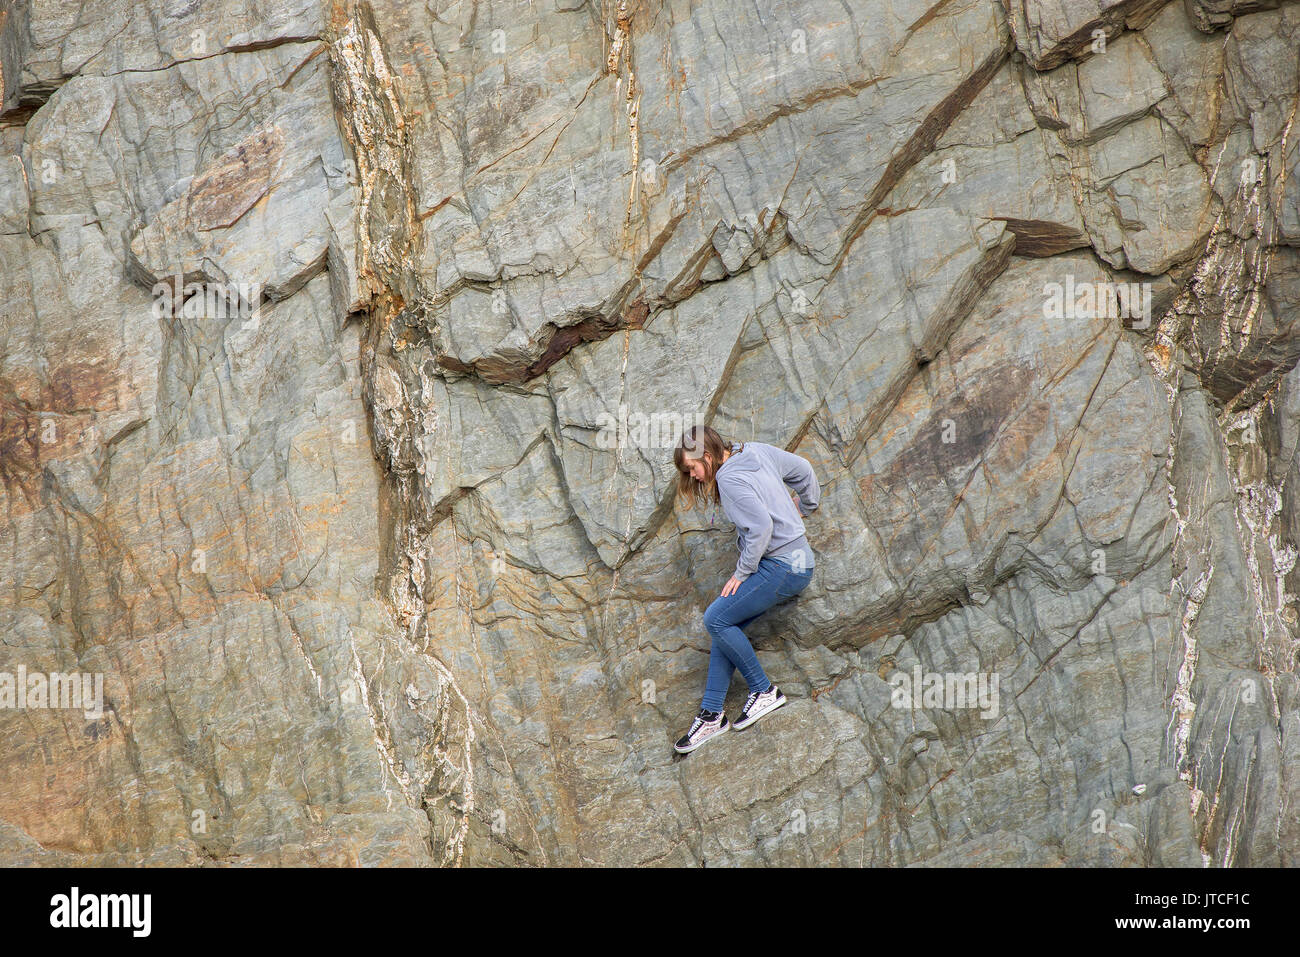 A young girl stuck on a rock face. Stock Photo